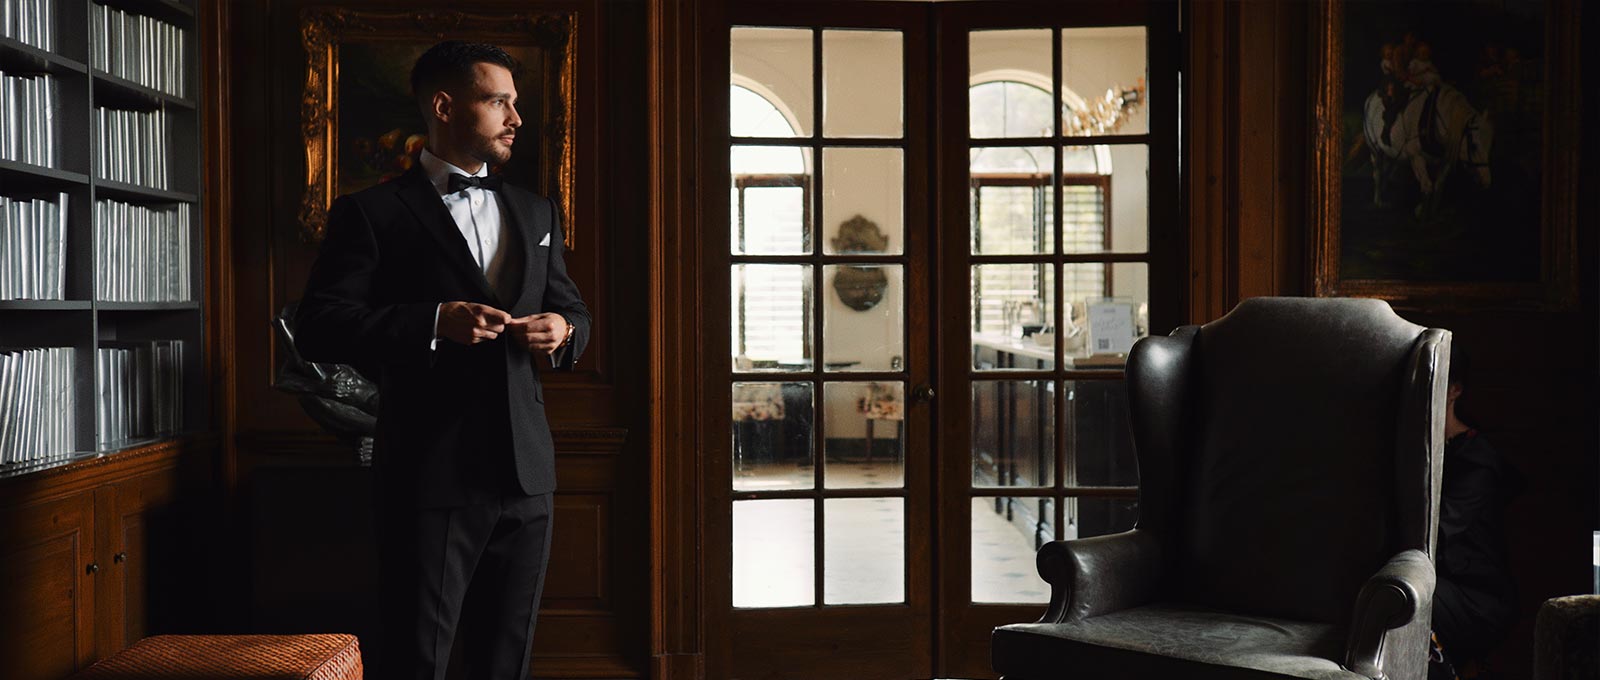 Groom gets ready in Graydon Hall's study moments before his wedding ceremony.